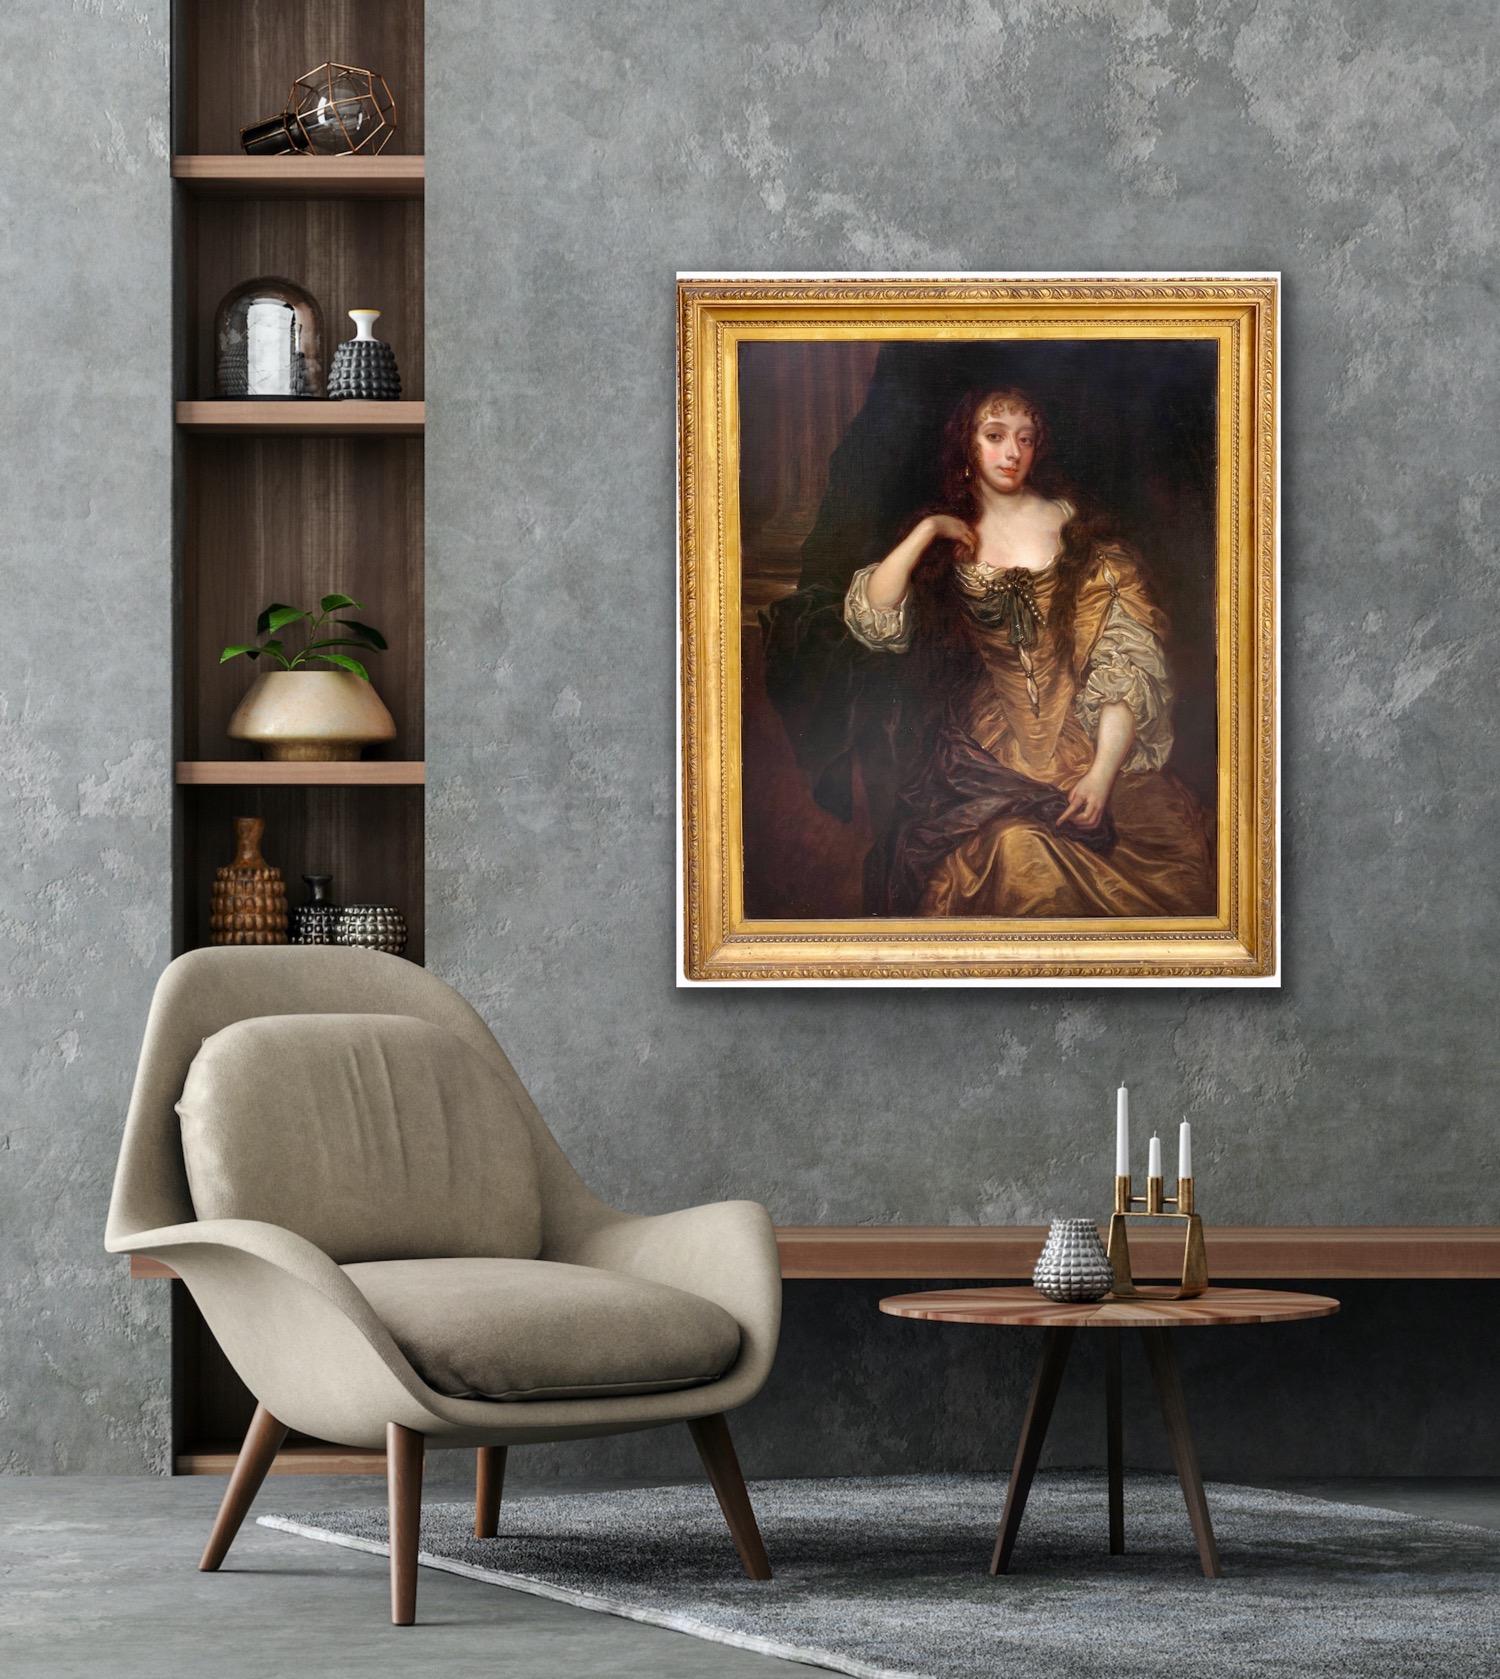 Huge Antique British portrait painting of a Noble Woman - Peter Lely Pearls - Painting by (follower of) Peter Lely